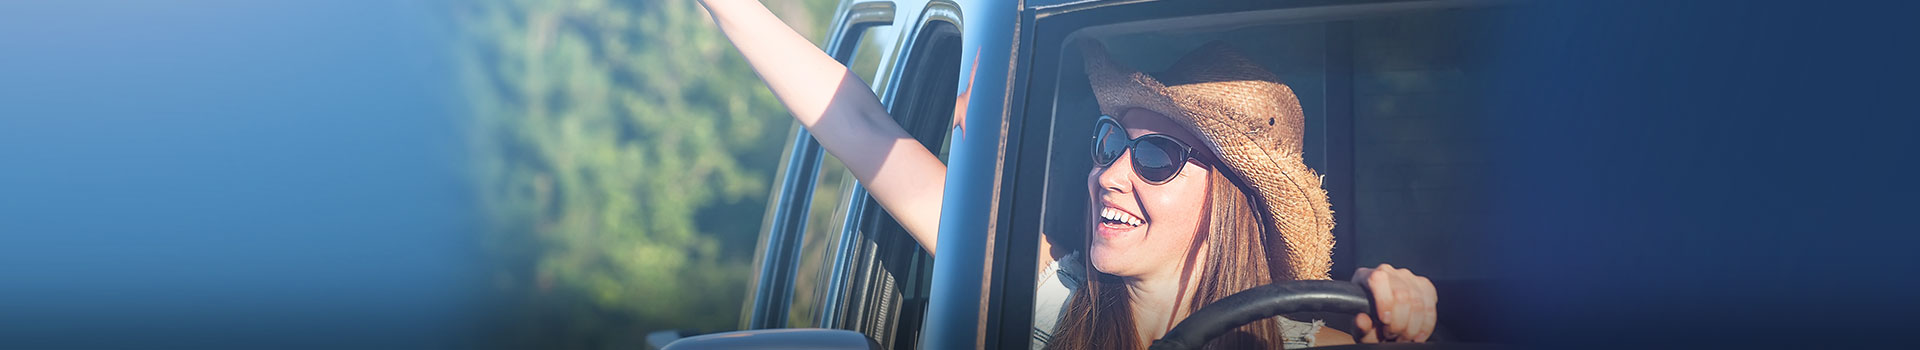 young woman waving out car window while driving